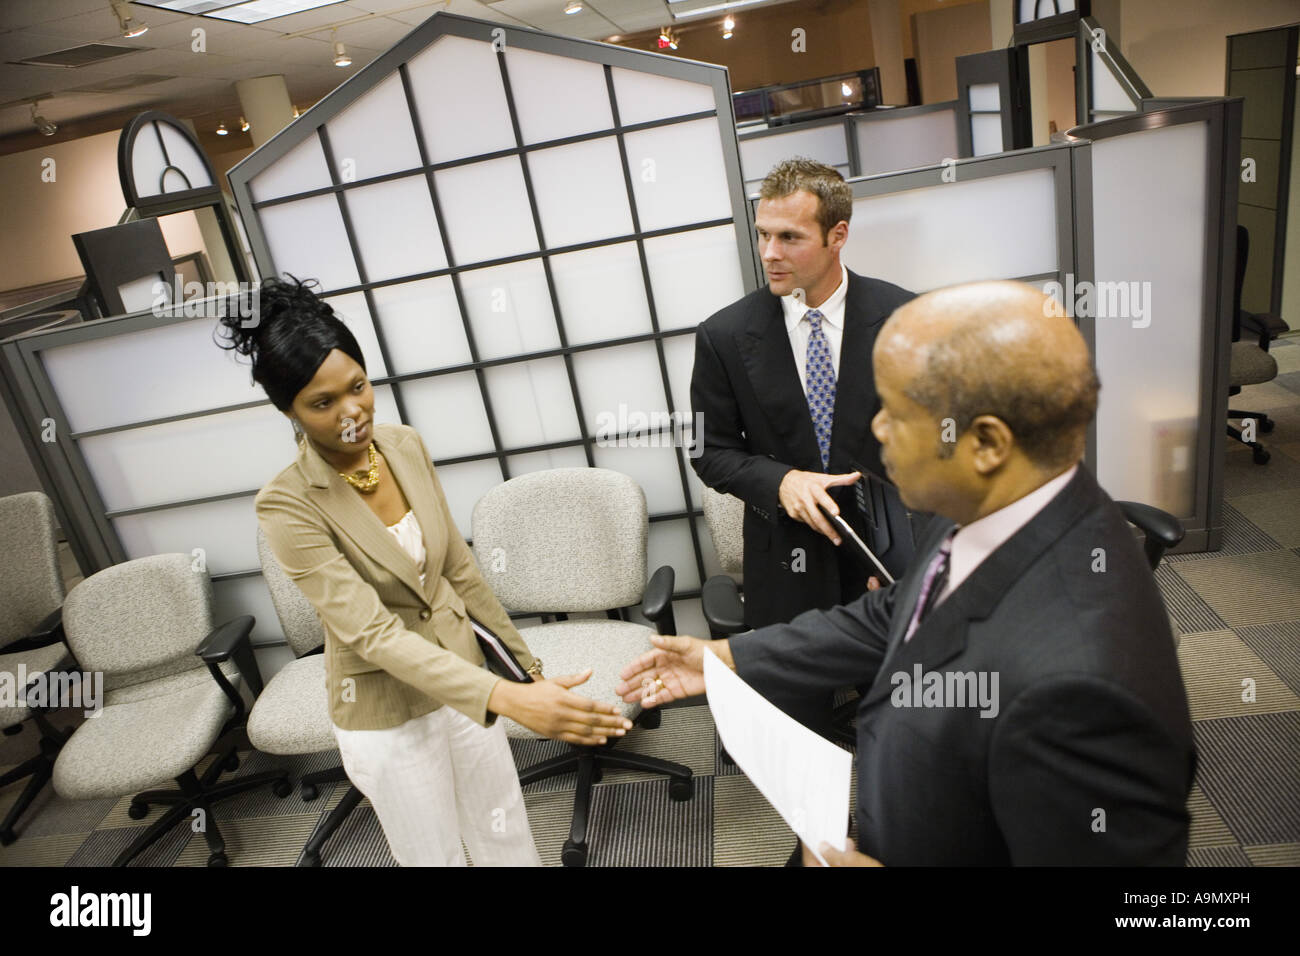 Business people meeting and shaking hands Stock Photo